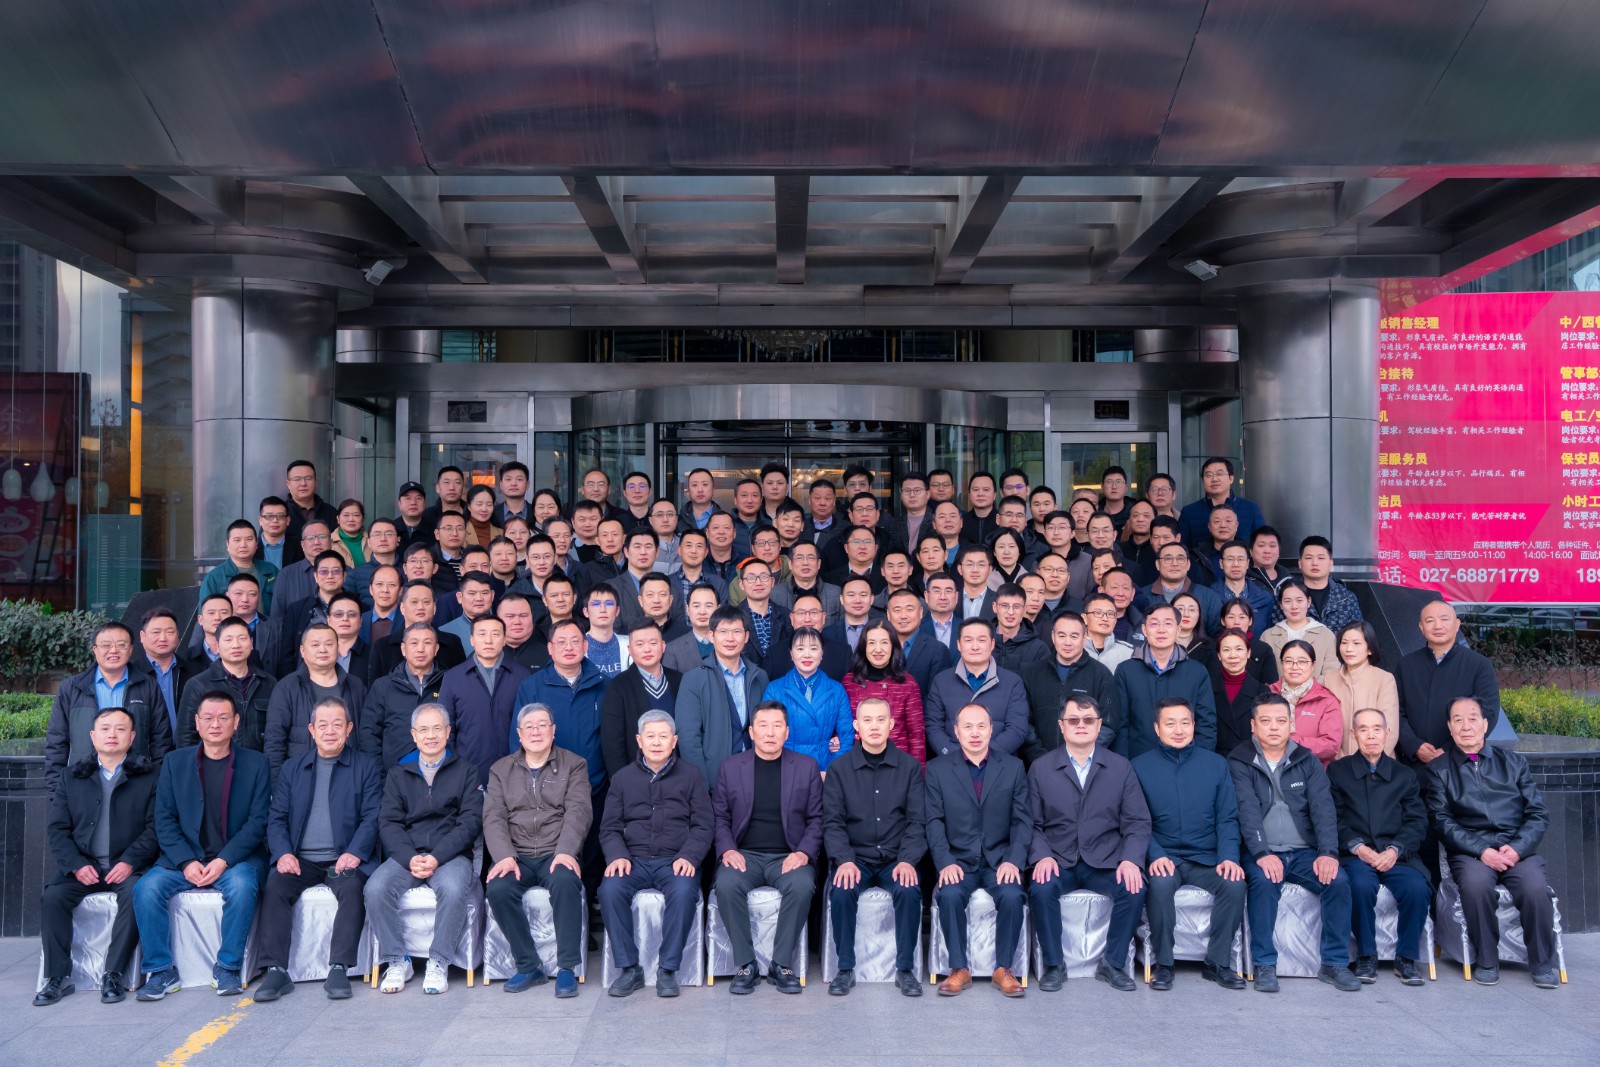 Annual Meeting of Hubei Mold Industry Association